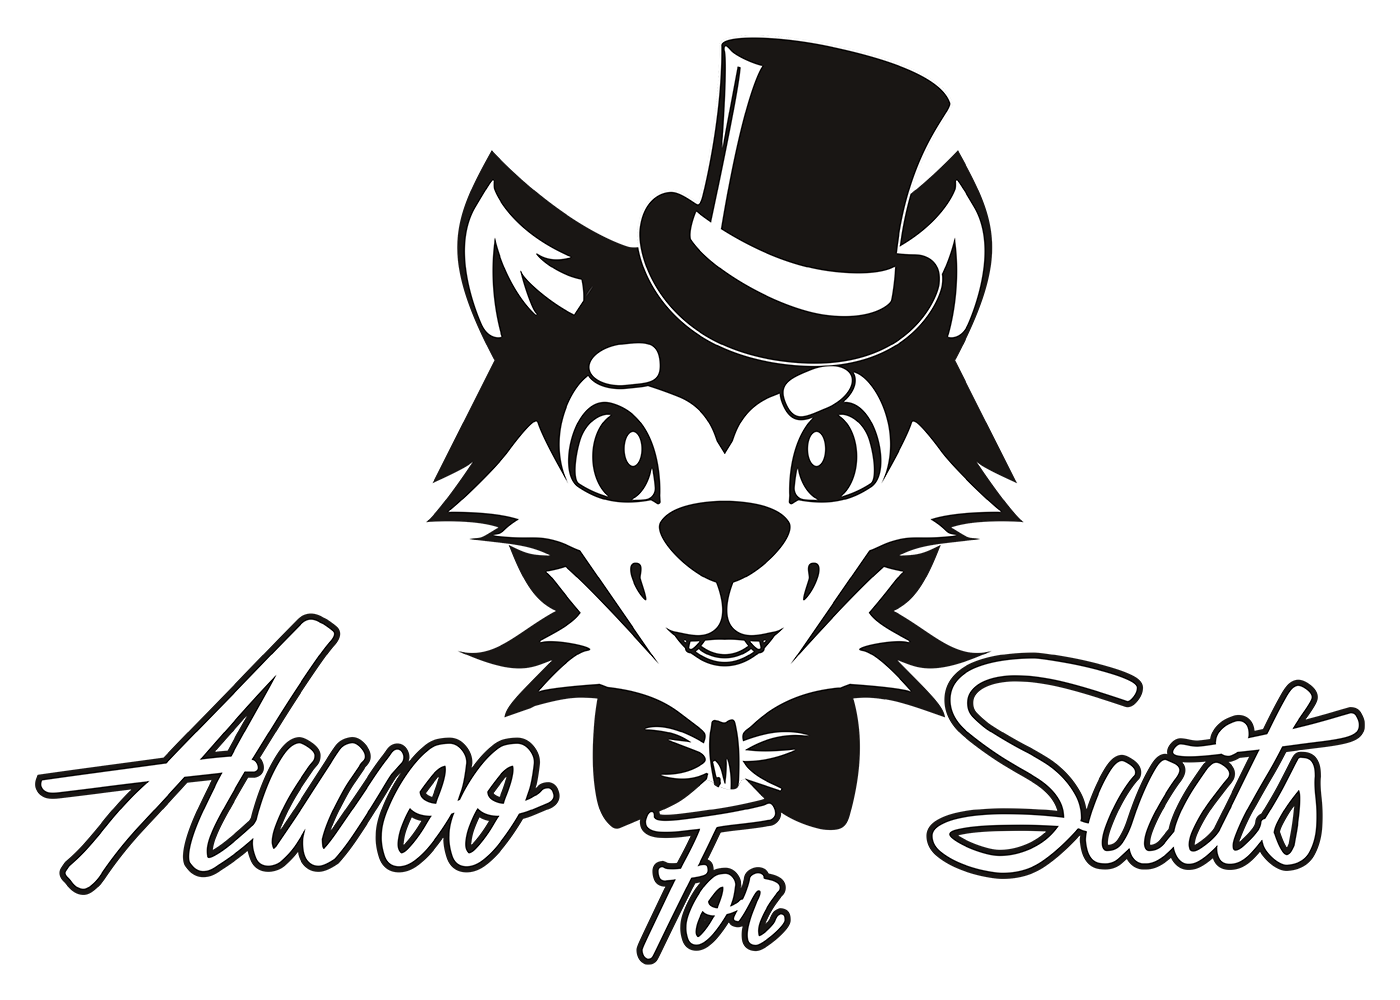 Logo AwooForSuits